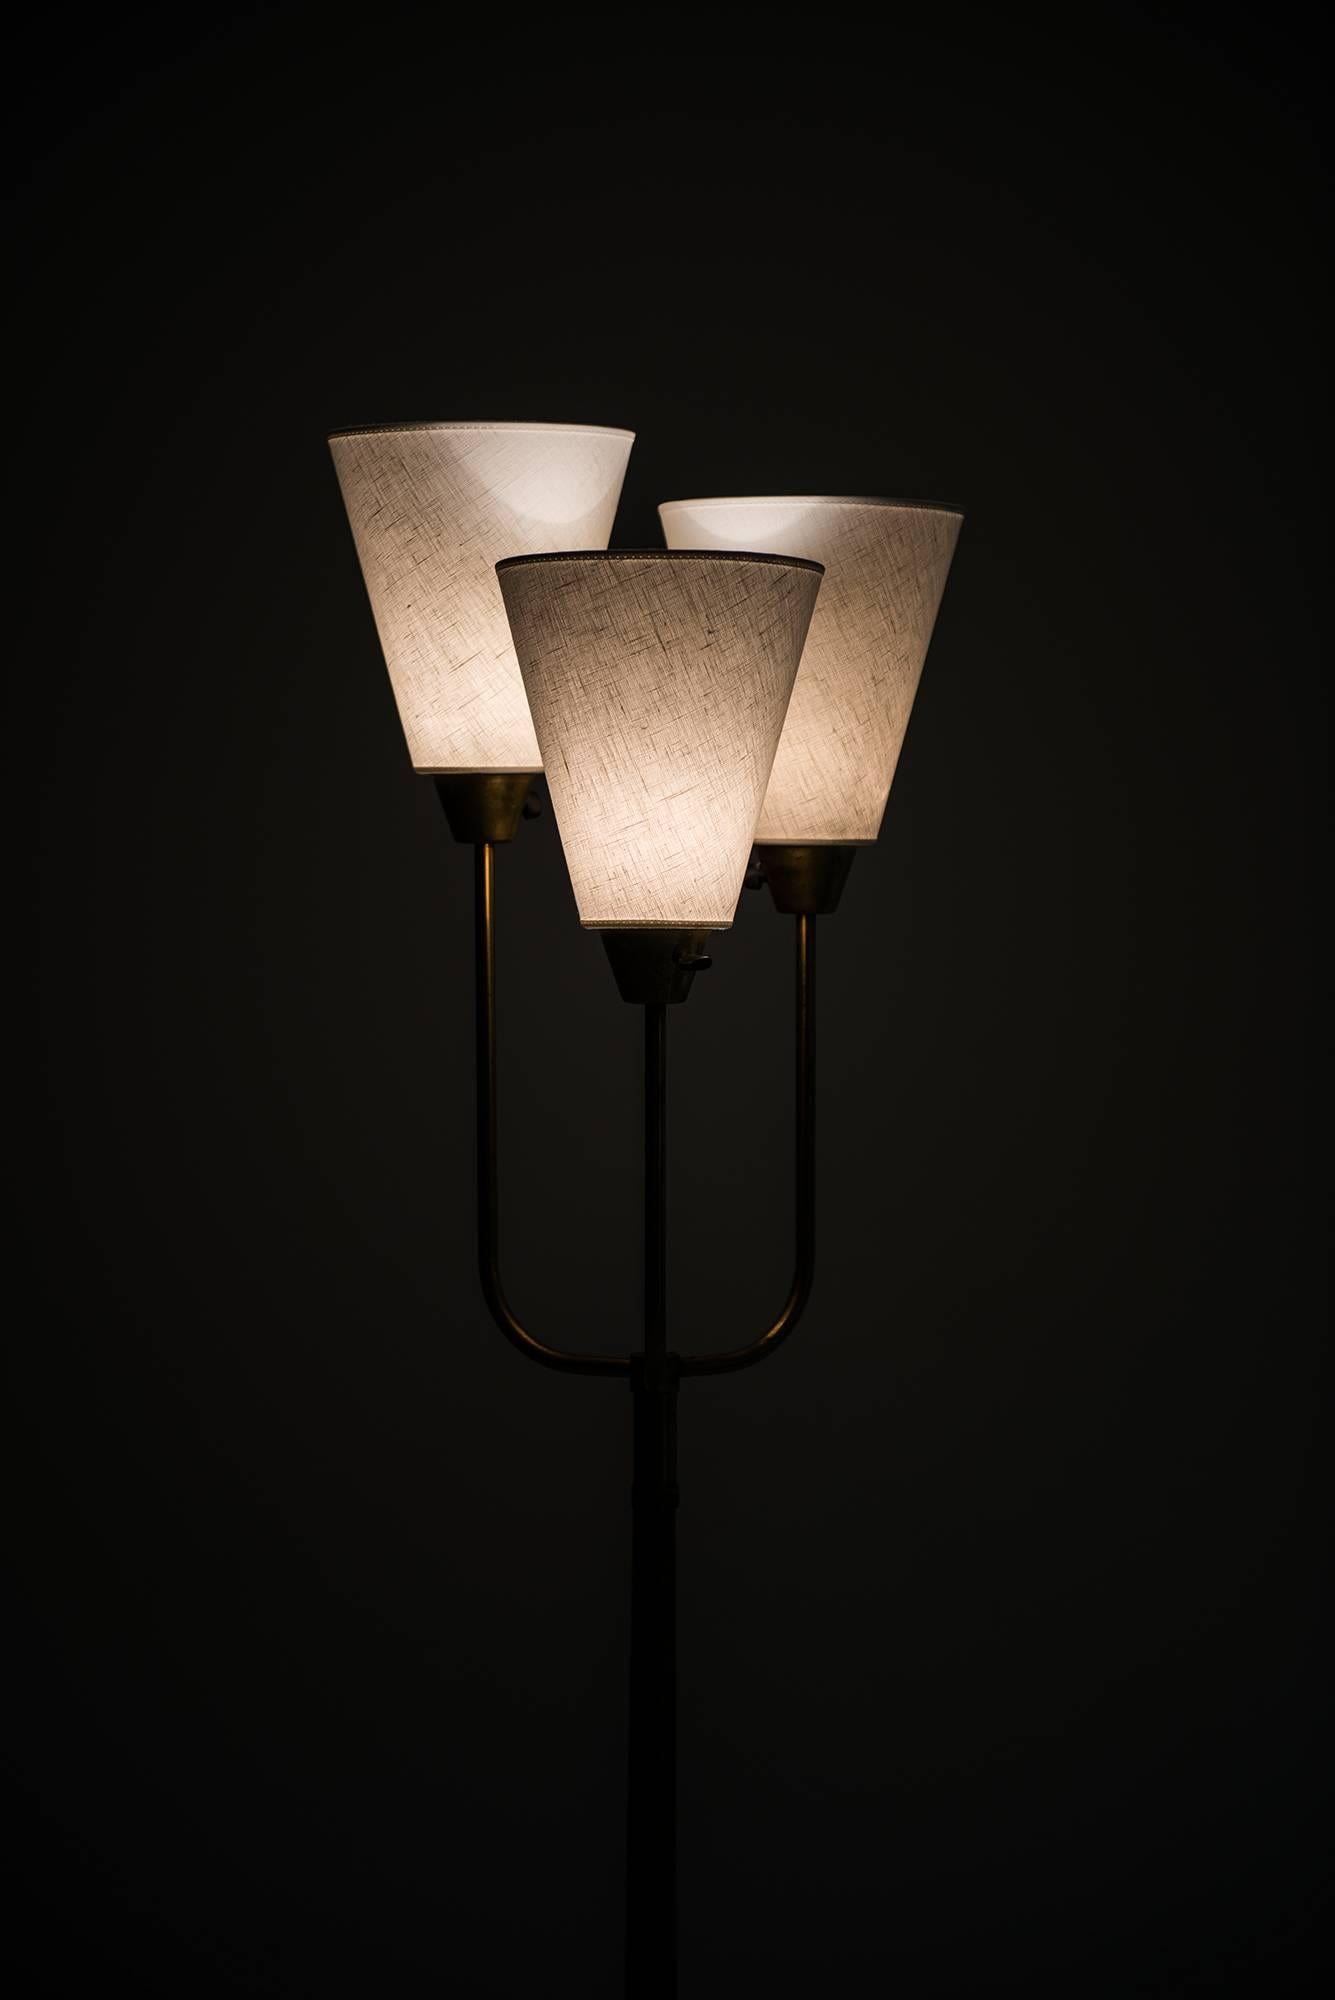 Midcentury Uplight with Three Arms Produced in Sweden 2